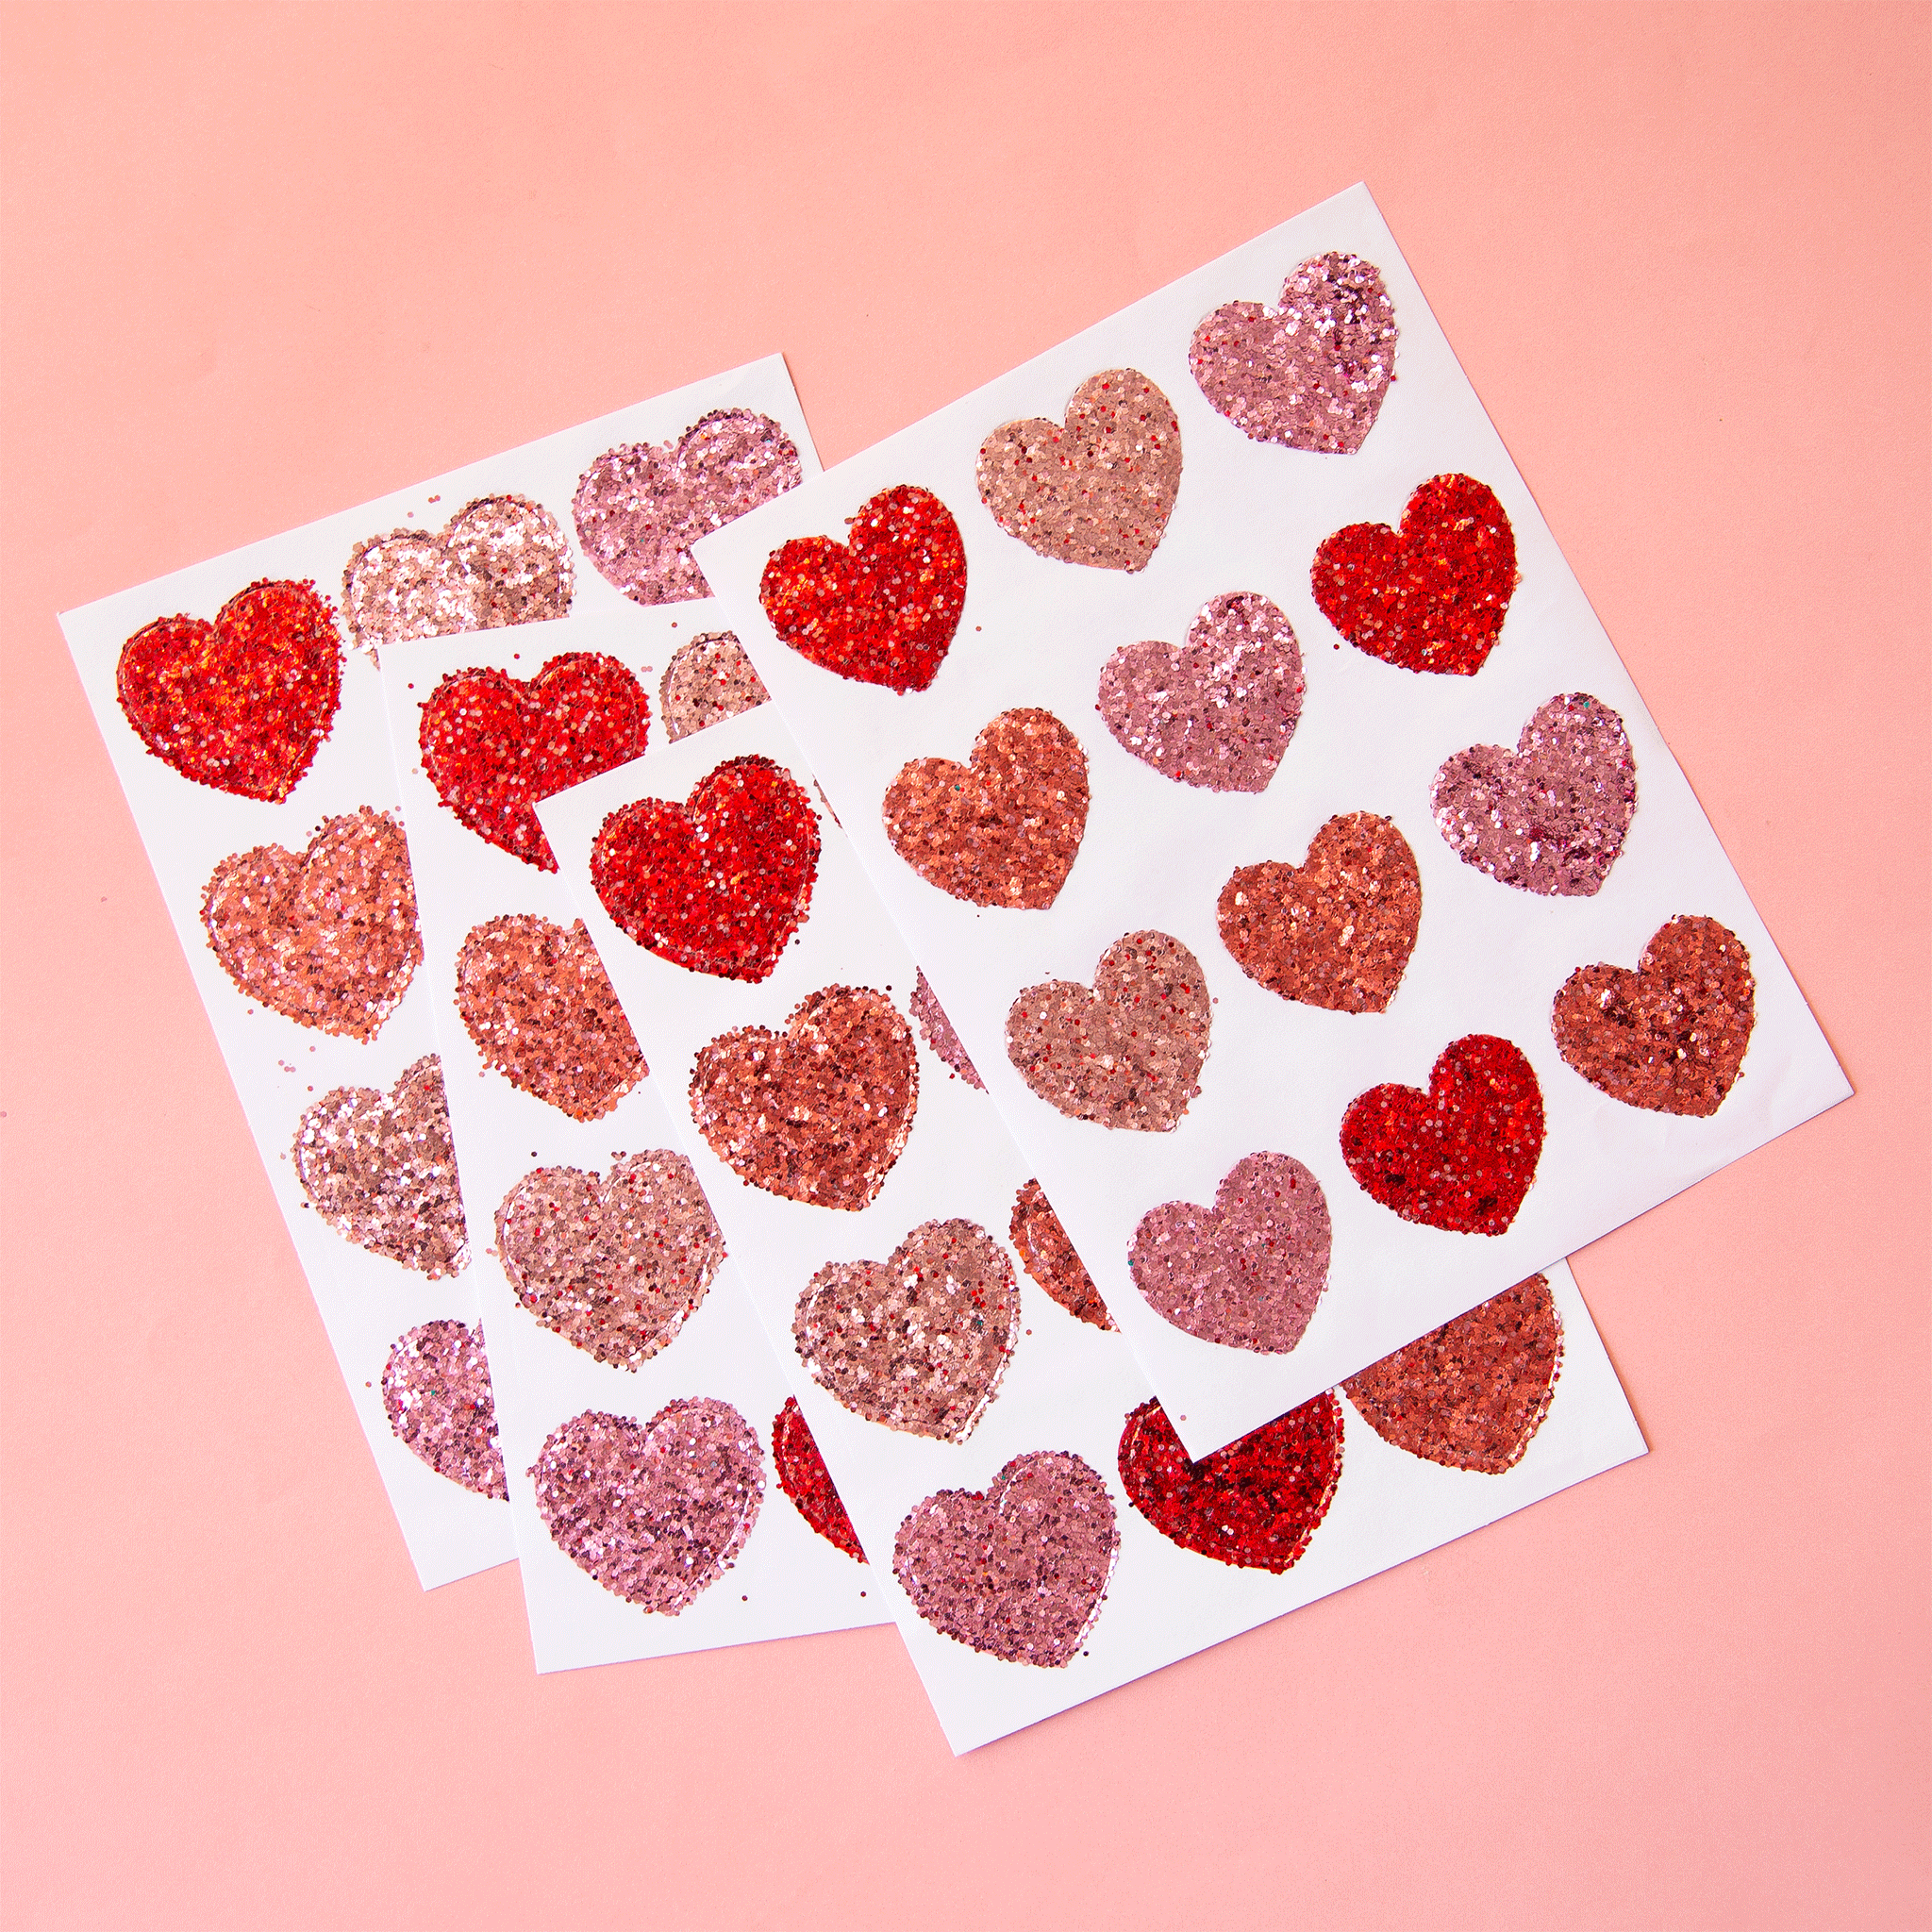 On a pink background is four sheets of heart shaped glitter stickers in shades of red and pink.  Edit alt text